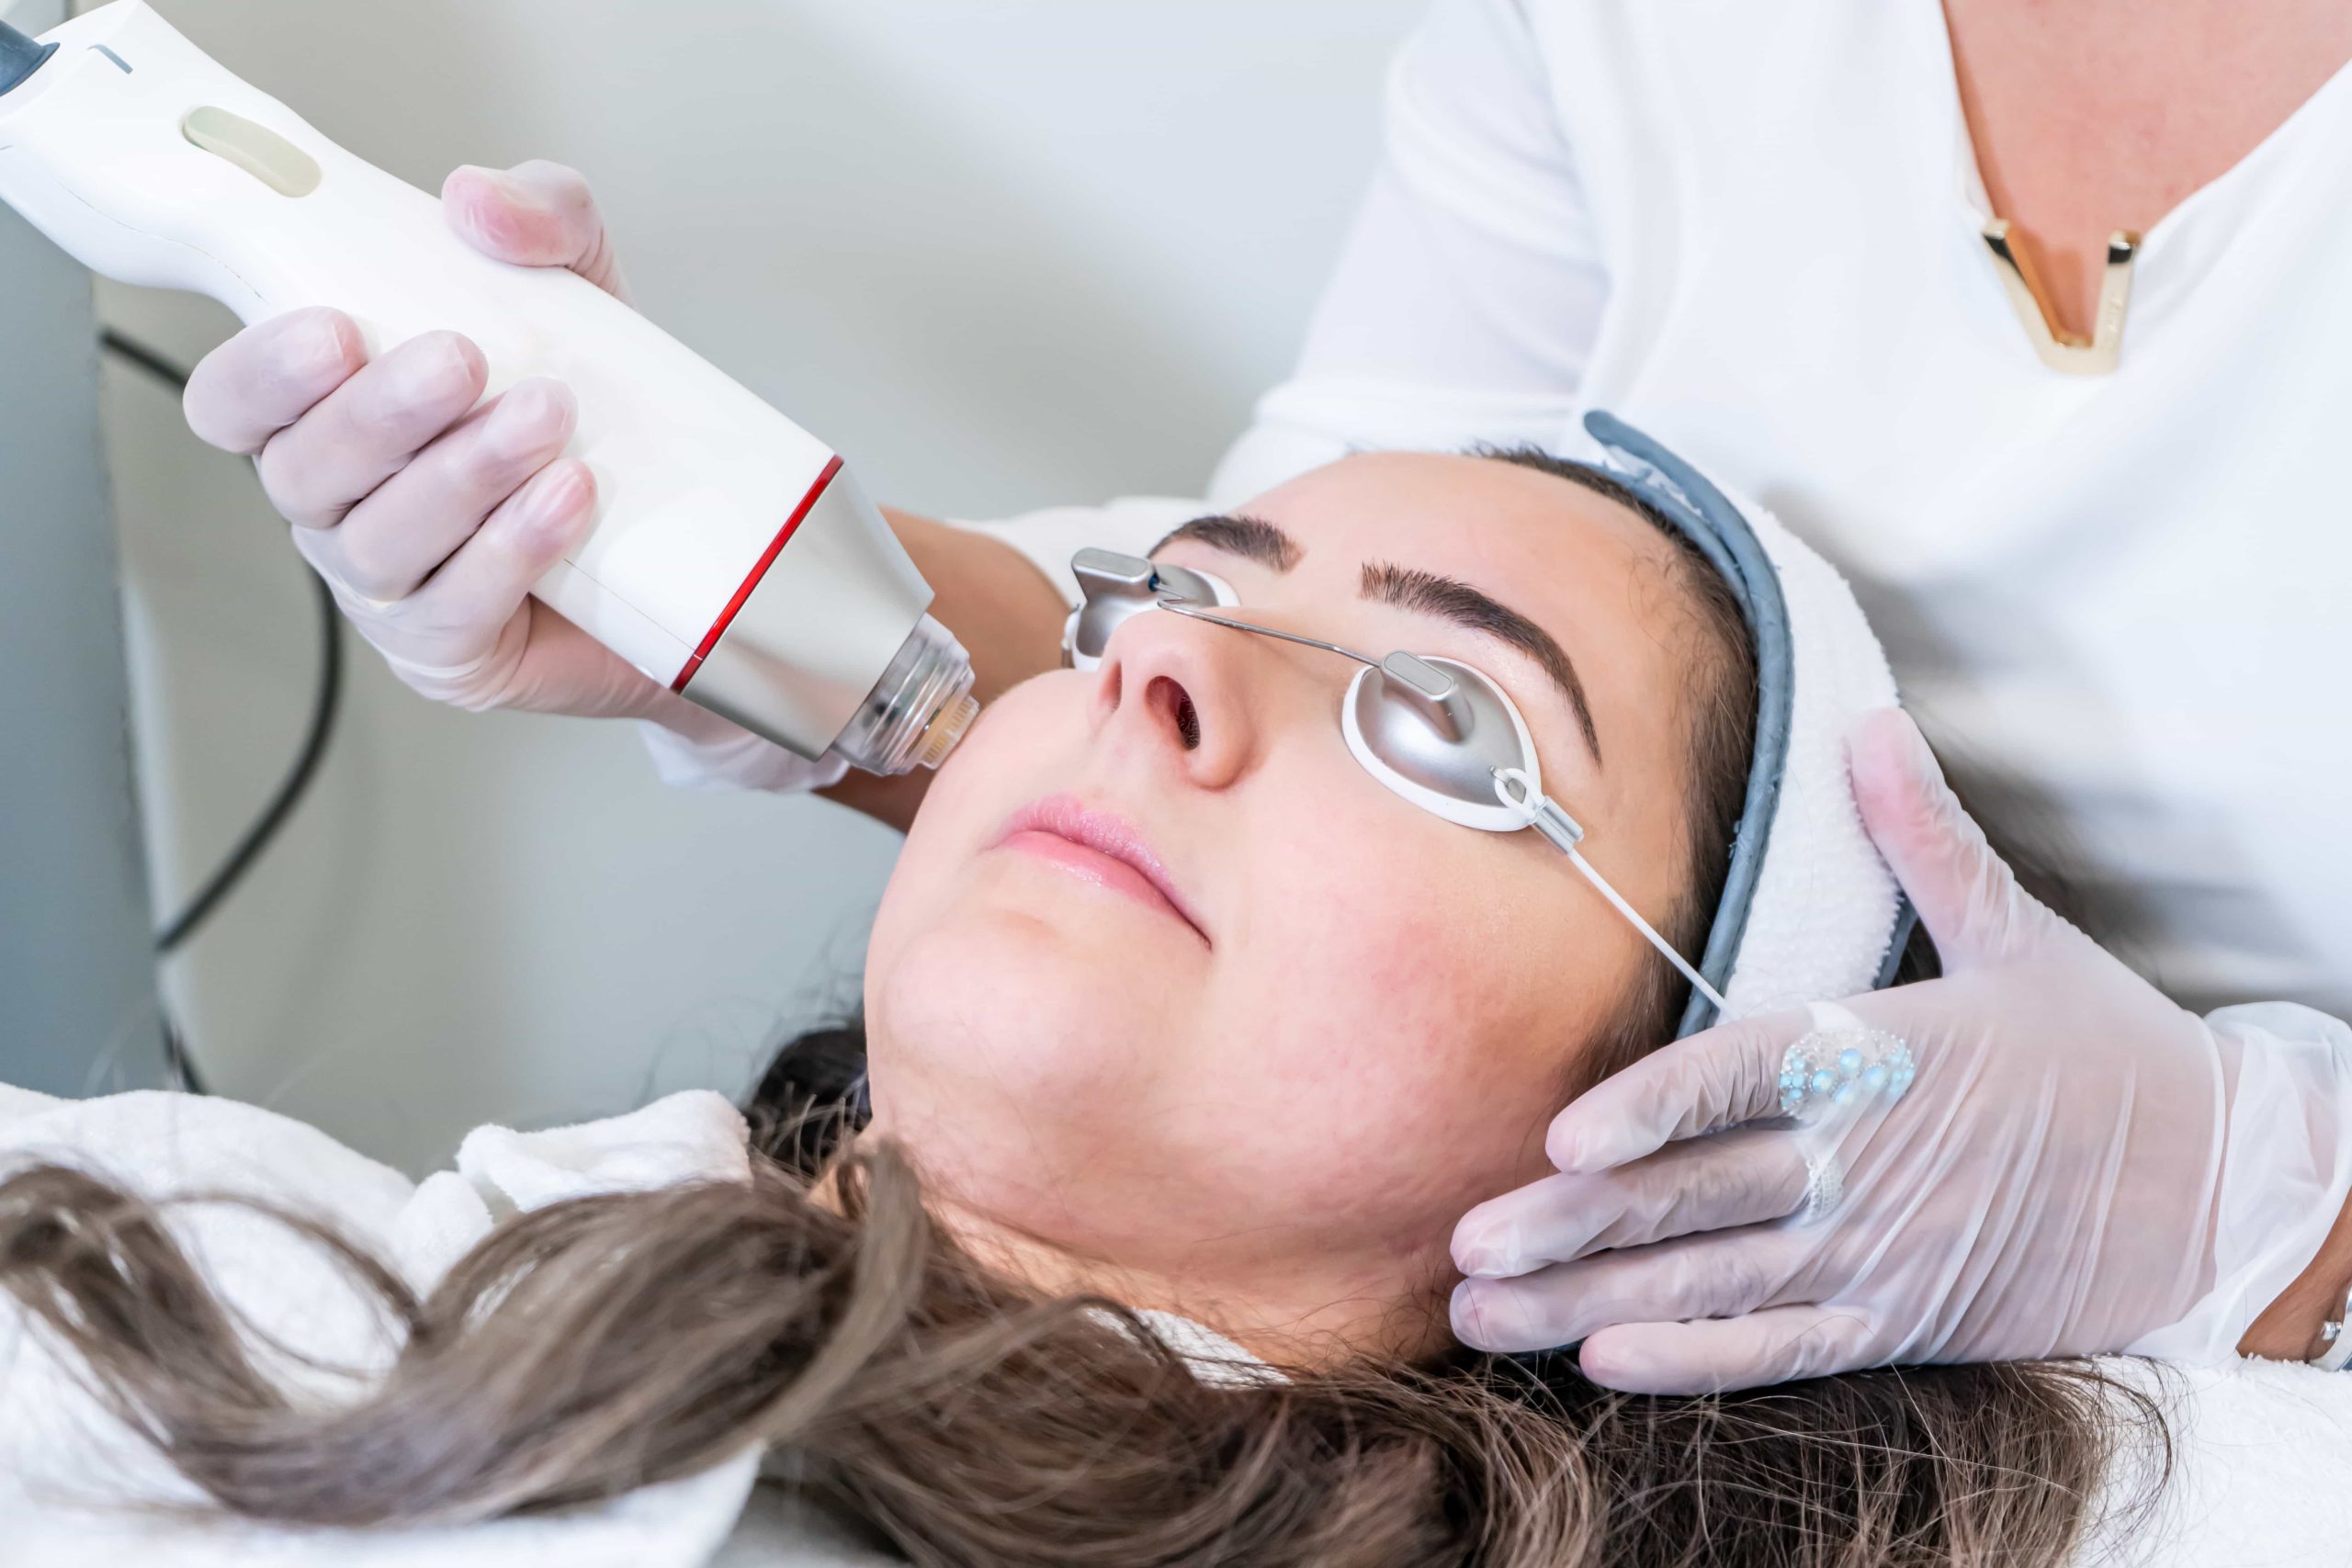 5 Benefits Of RF Microneedling You Should Know